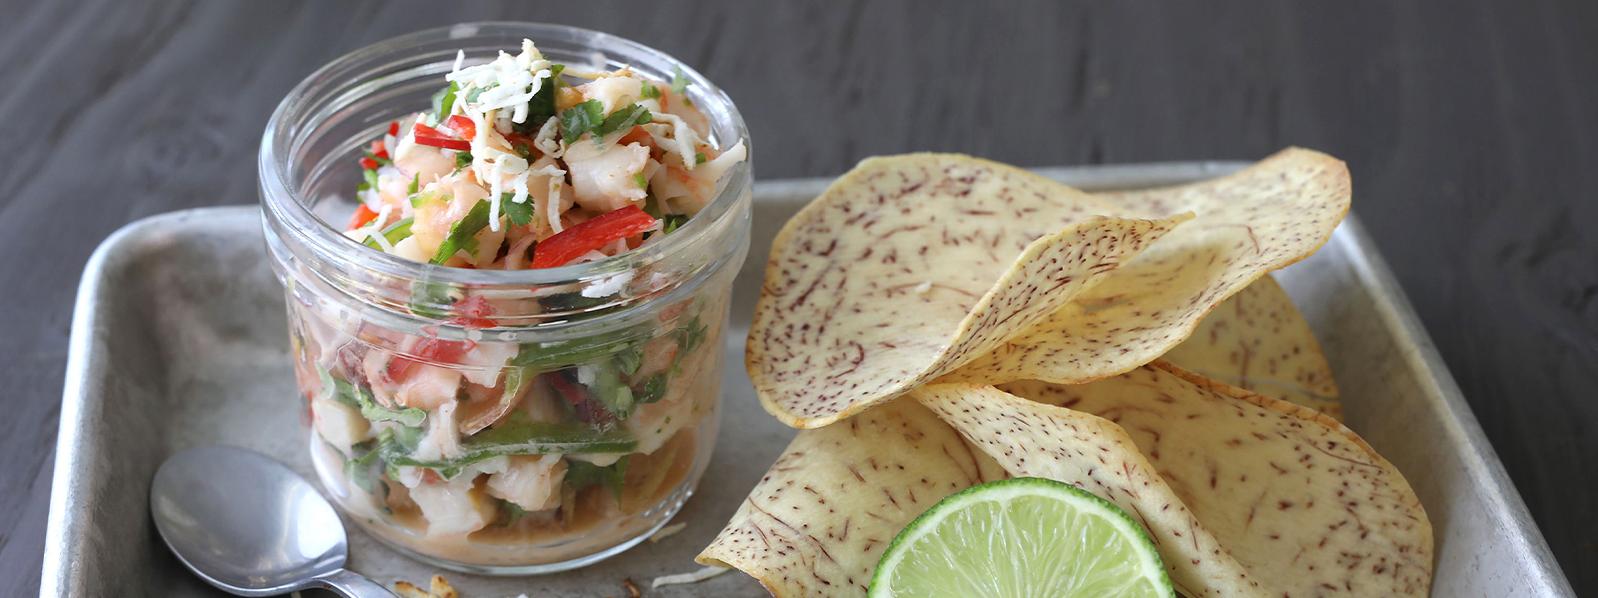  Bring some beach vibes to your next party with this delicious ceviche.